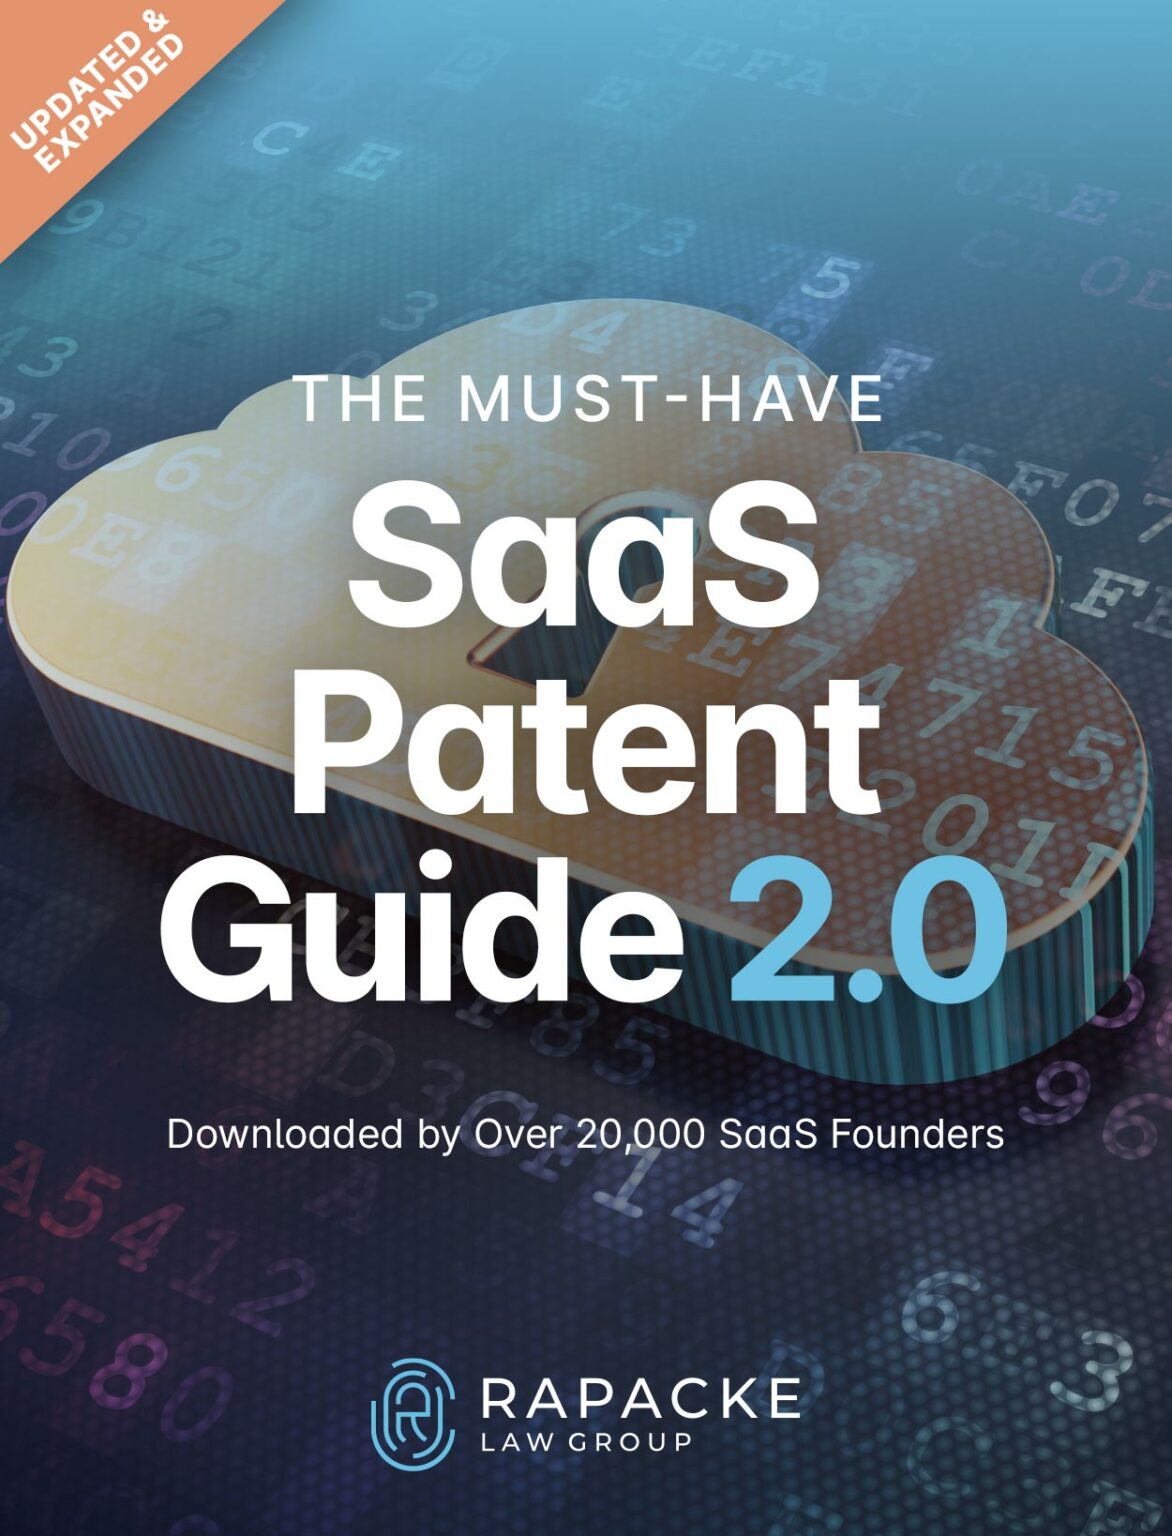 The Must-Have SaaS Patent Guide 2.0